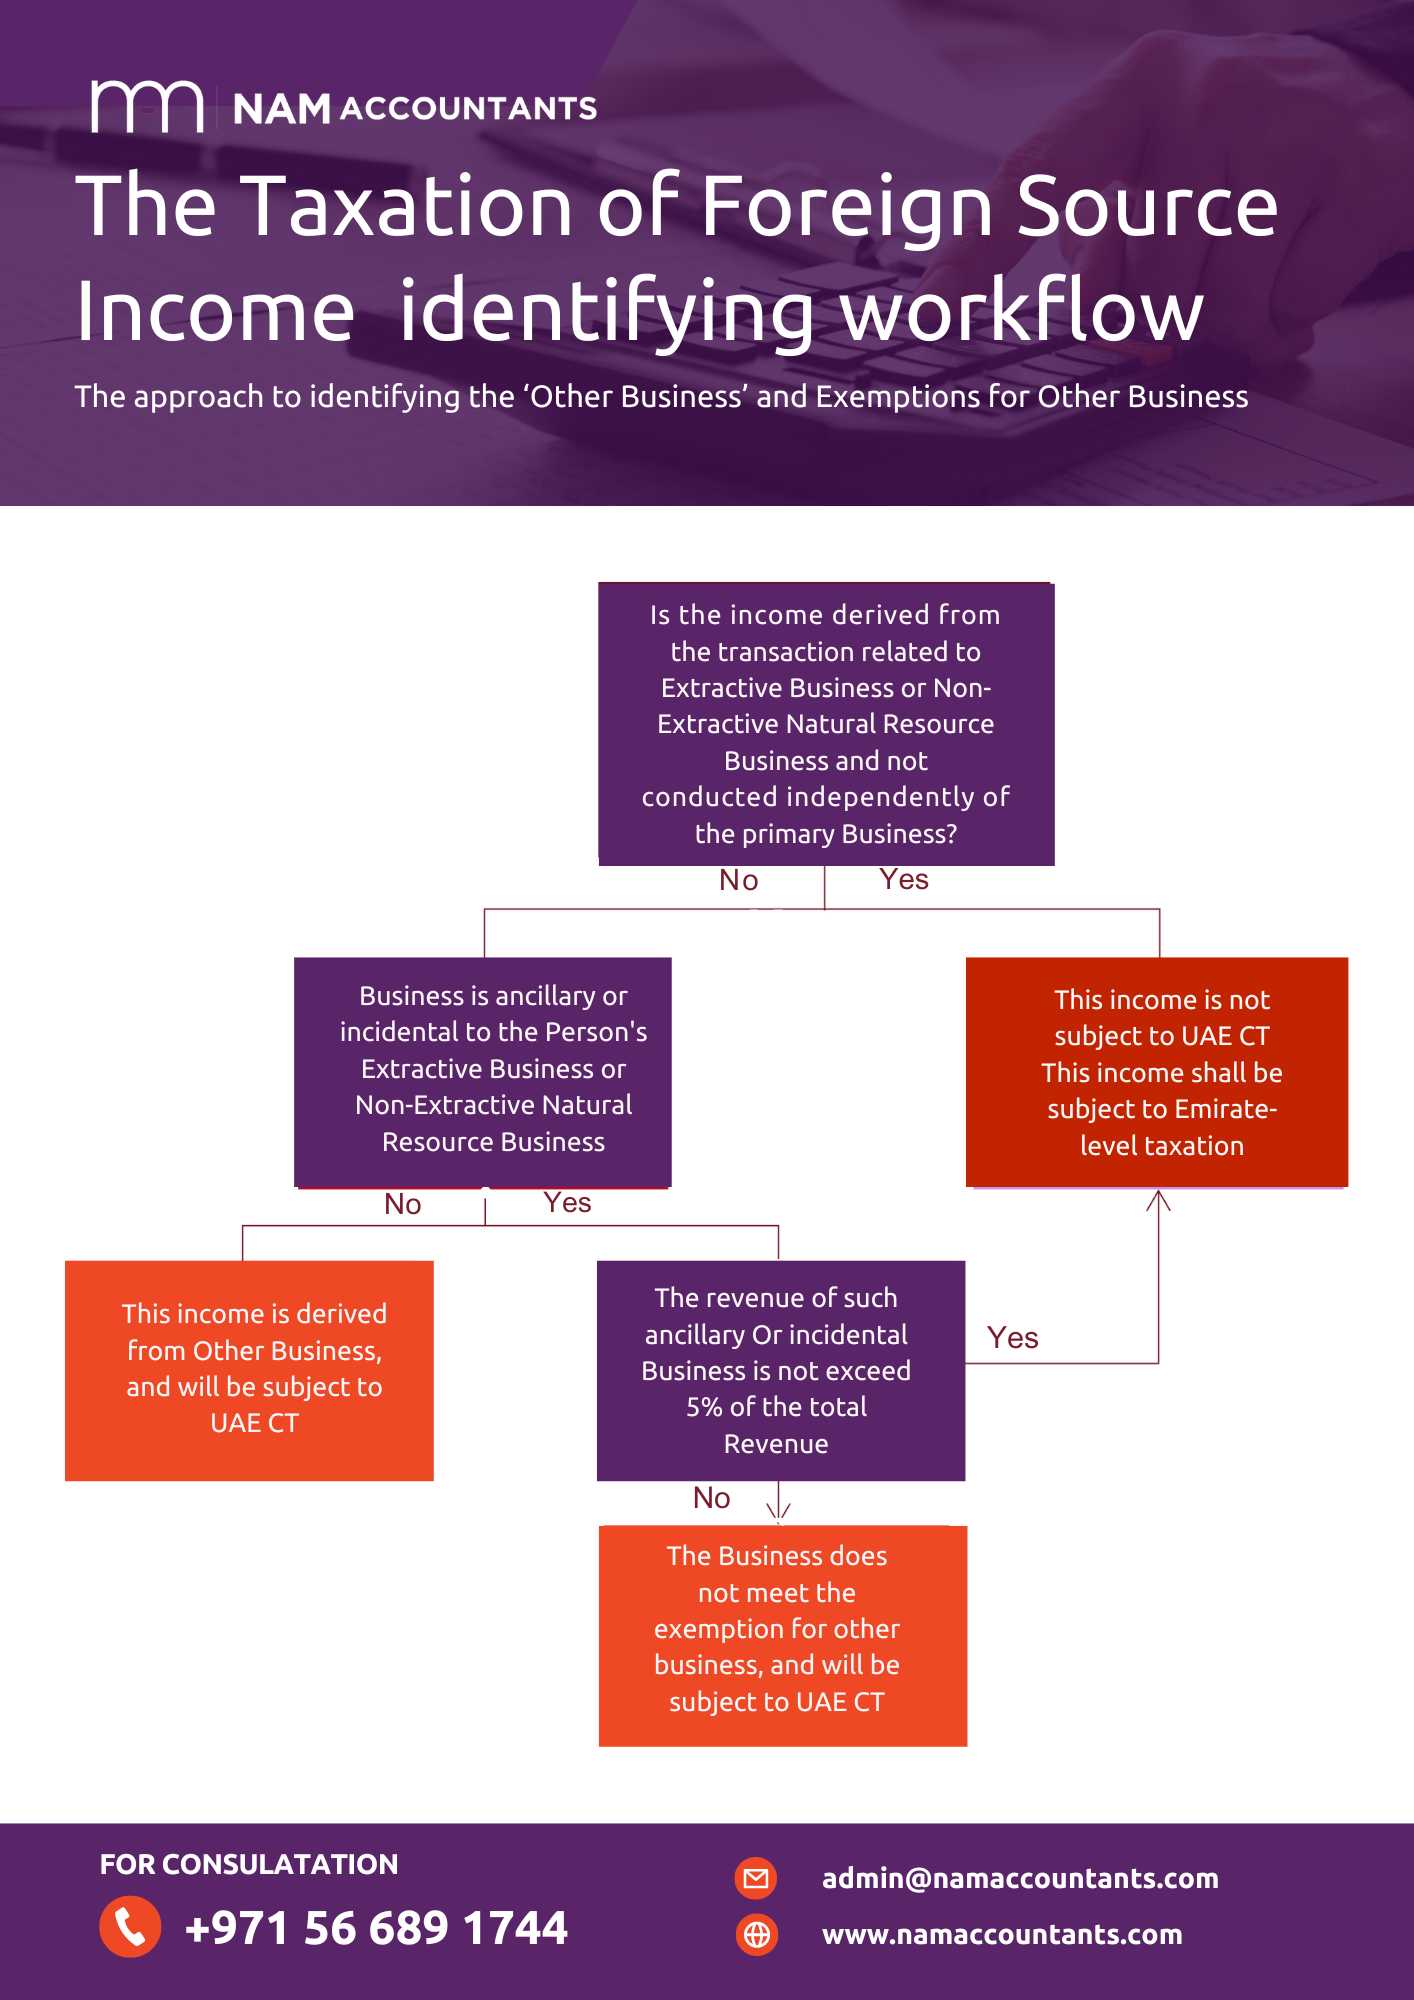 The Taxation of Foreign Source Income identifying workflow